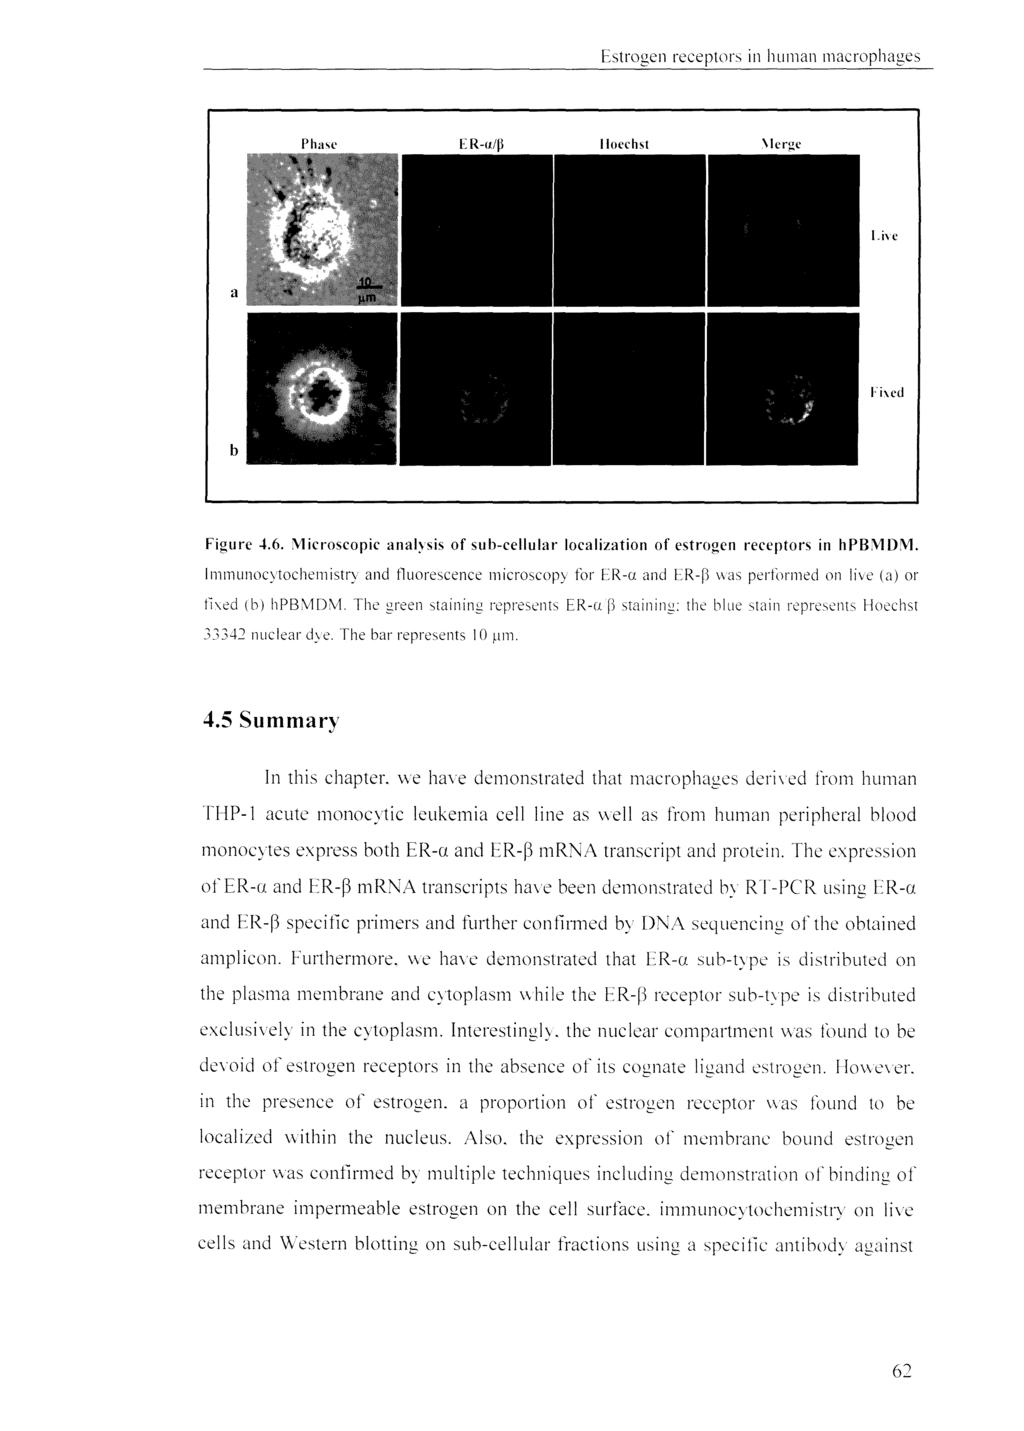 a b Figure 4.6. '\1icroscopic analysis of sub-cellular localization of estrogen receptors in hpb'\1d'\1.